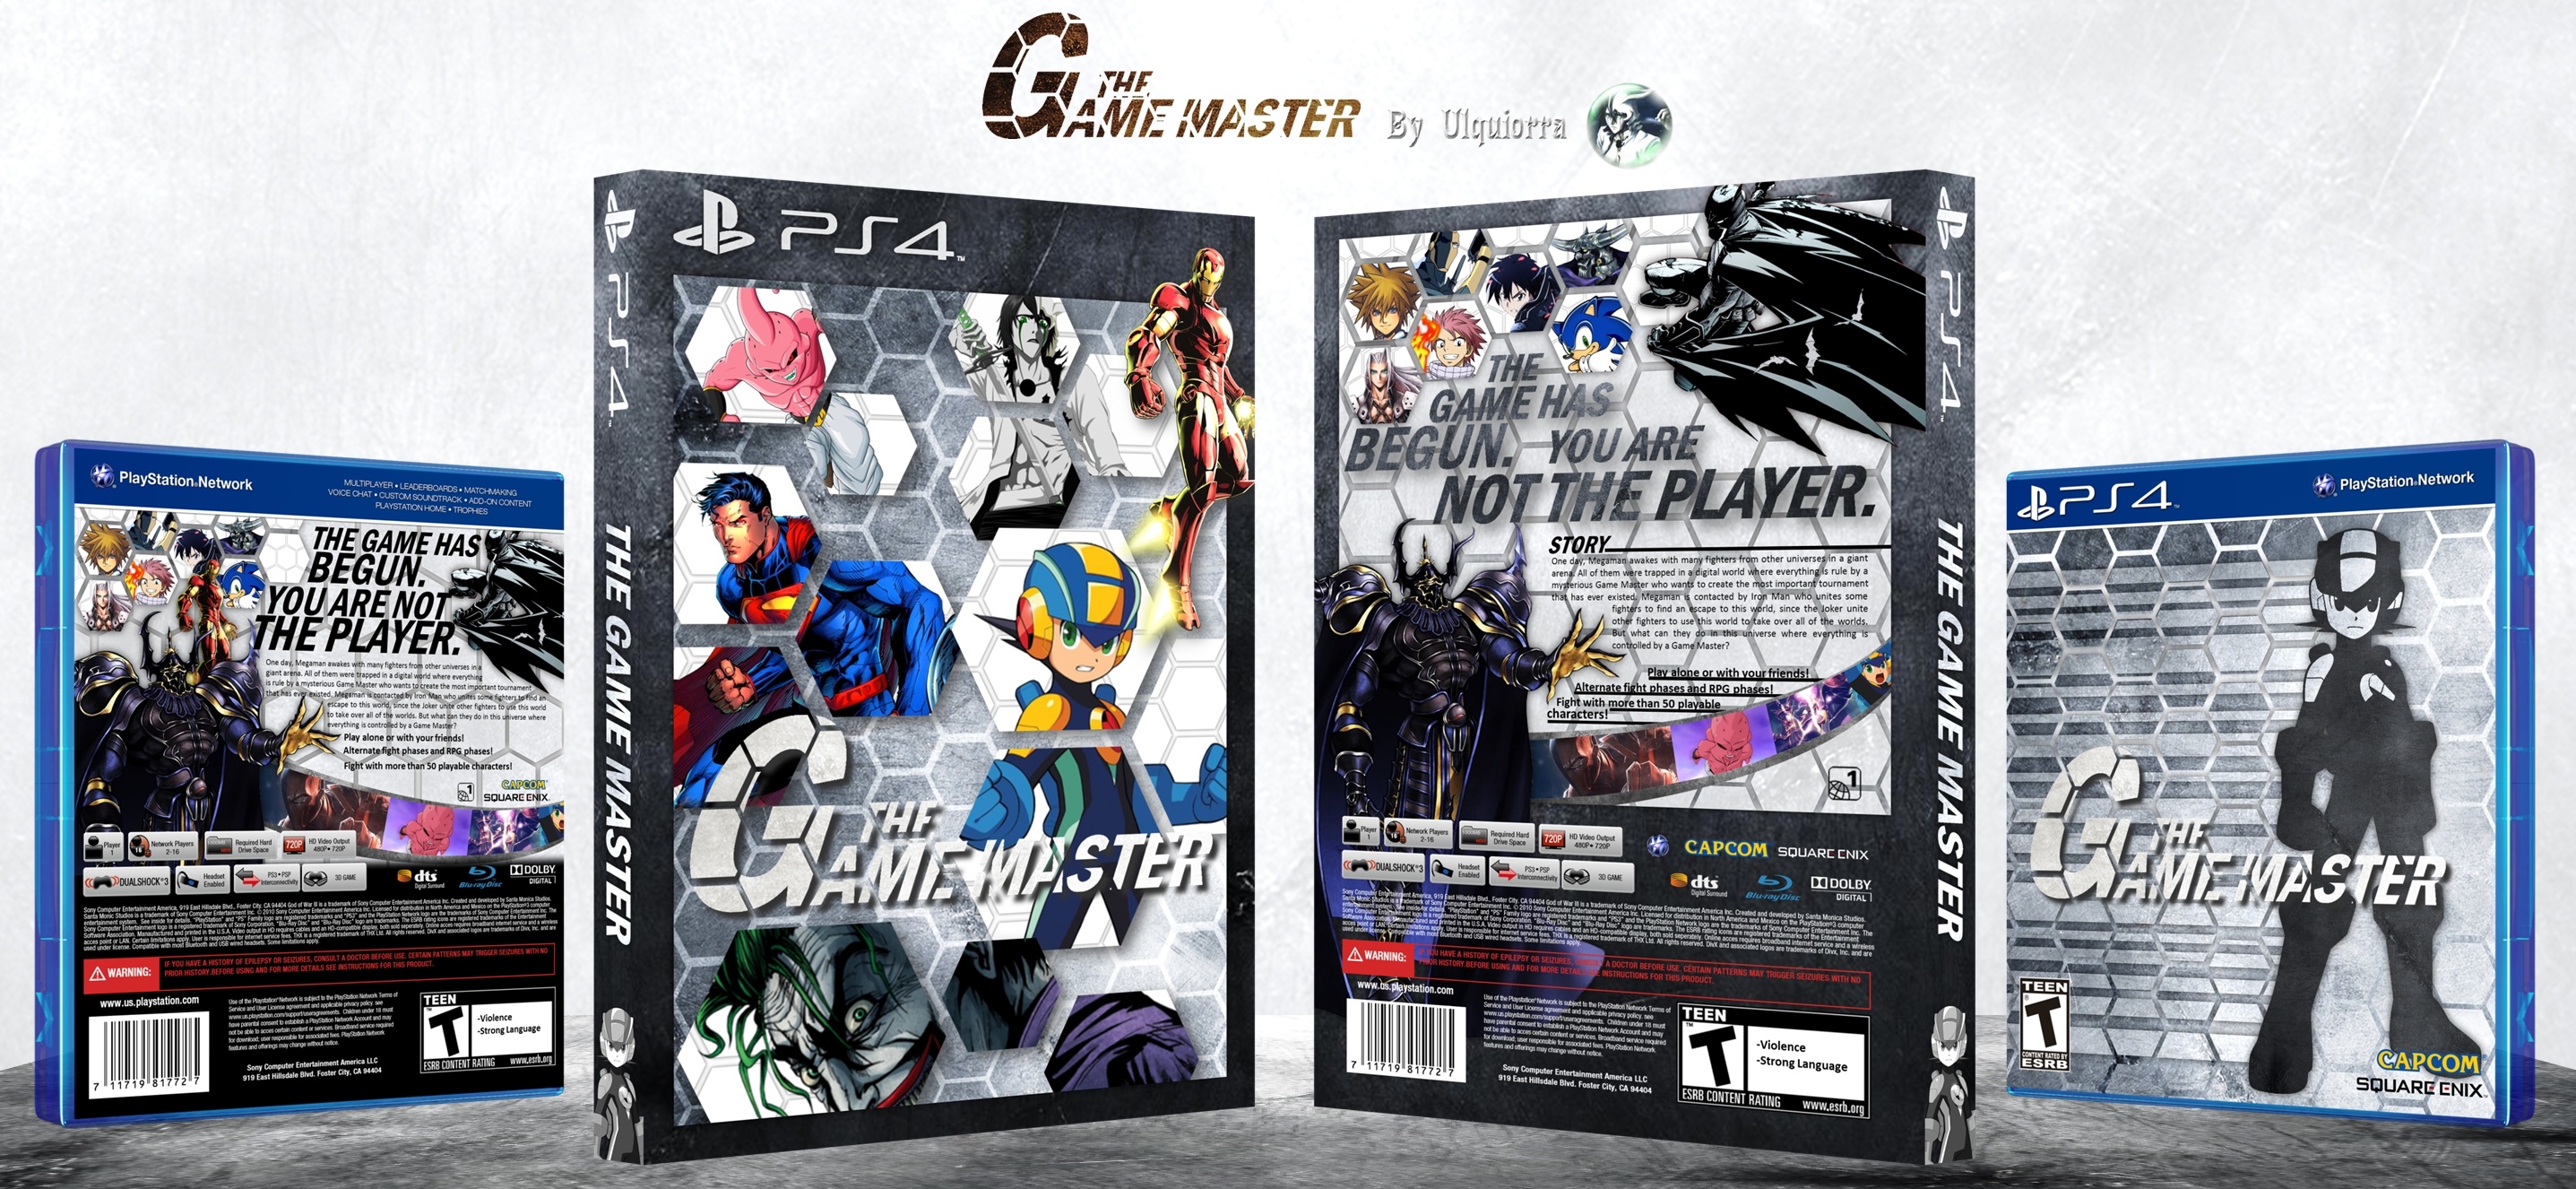 The Game Master box cover